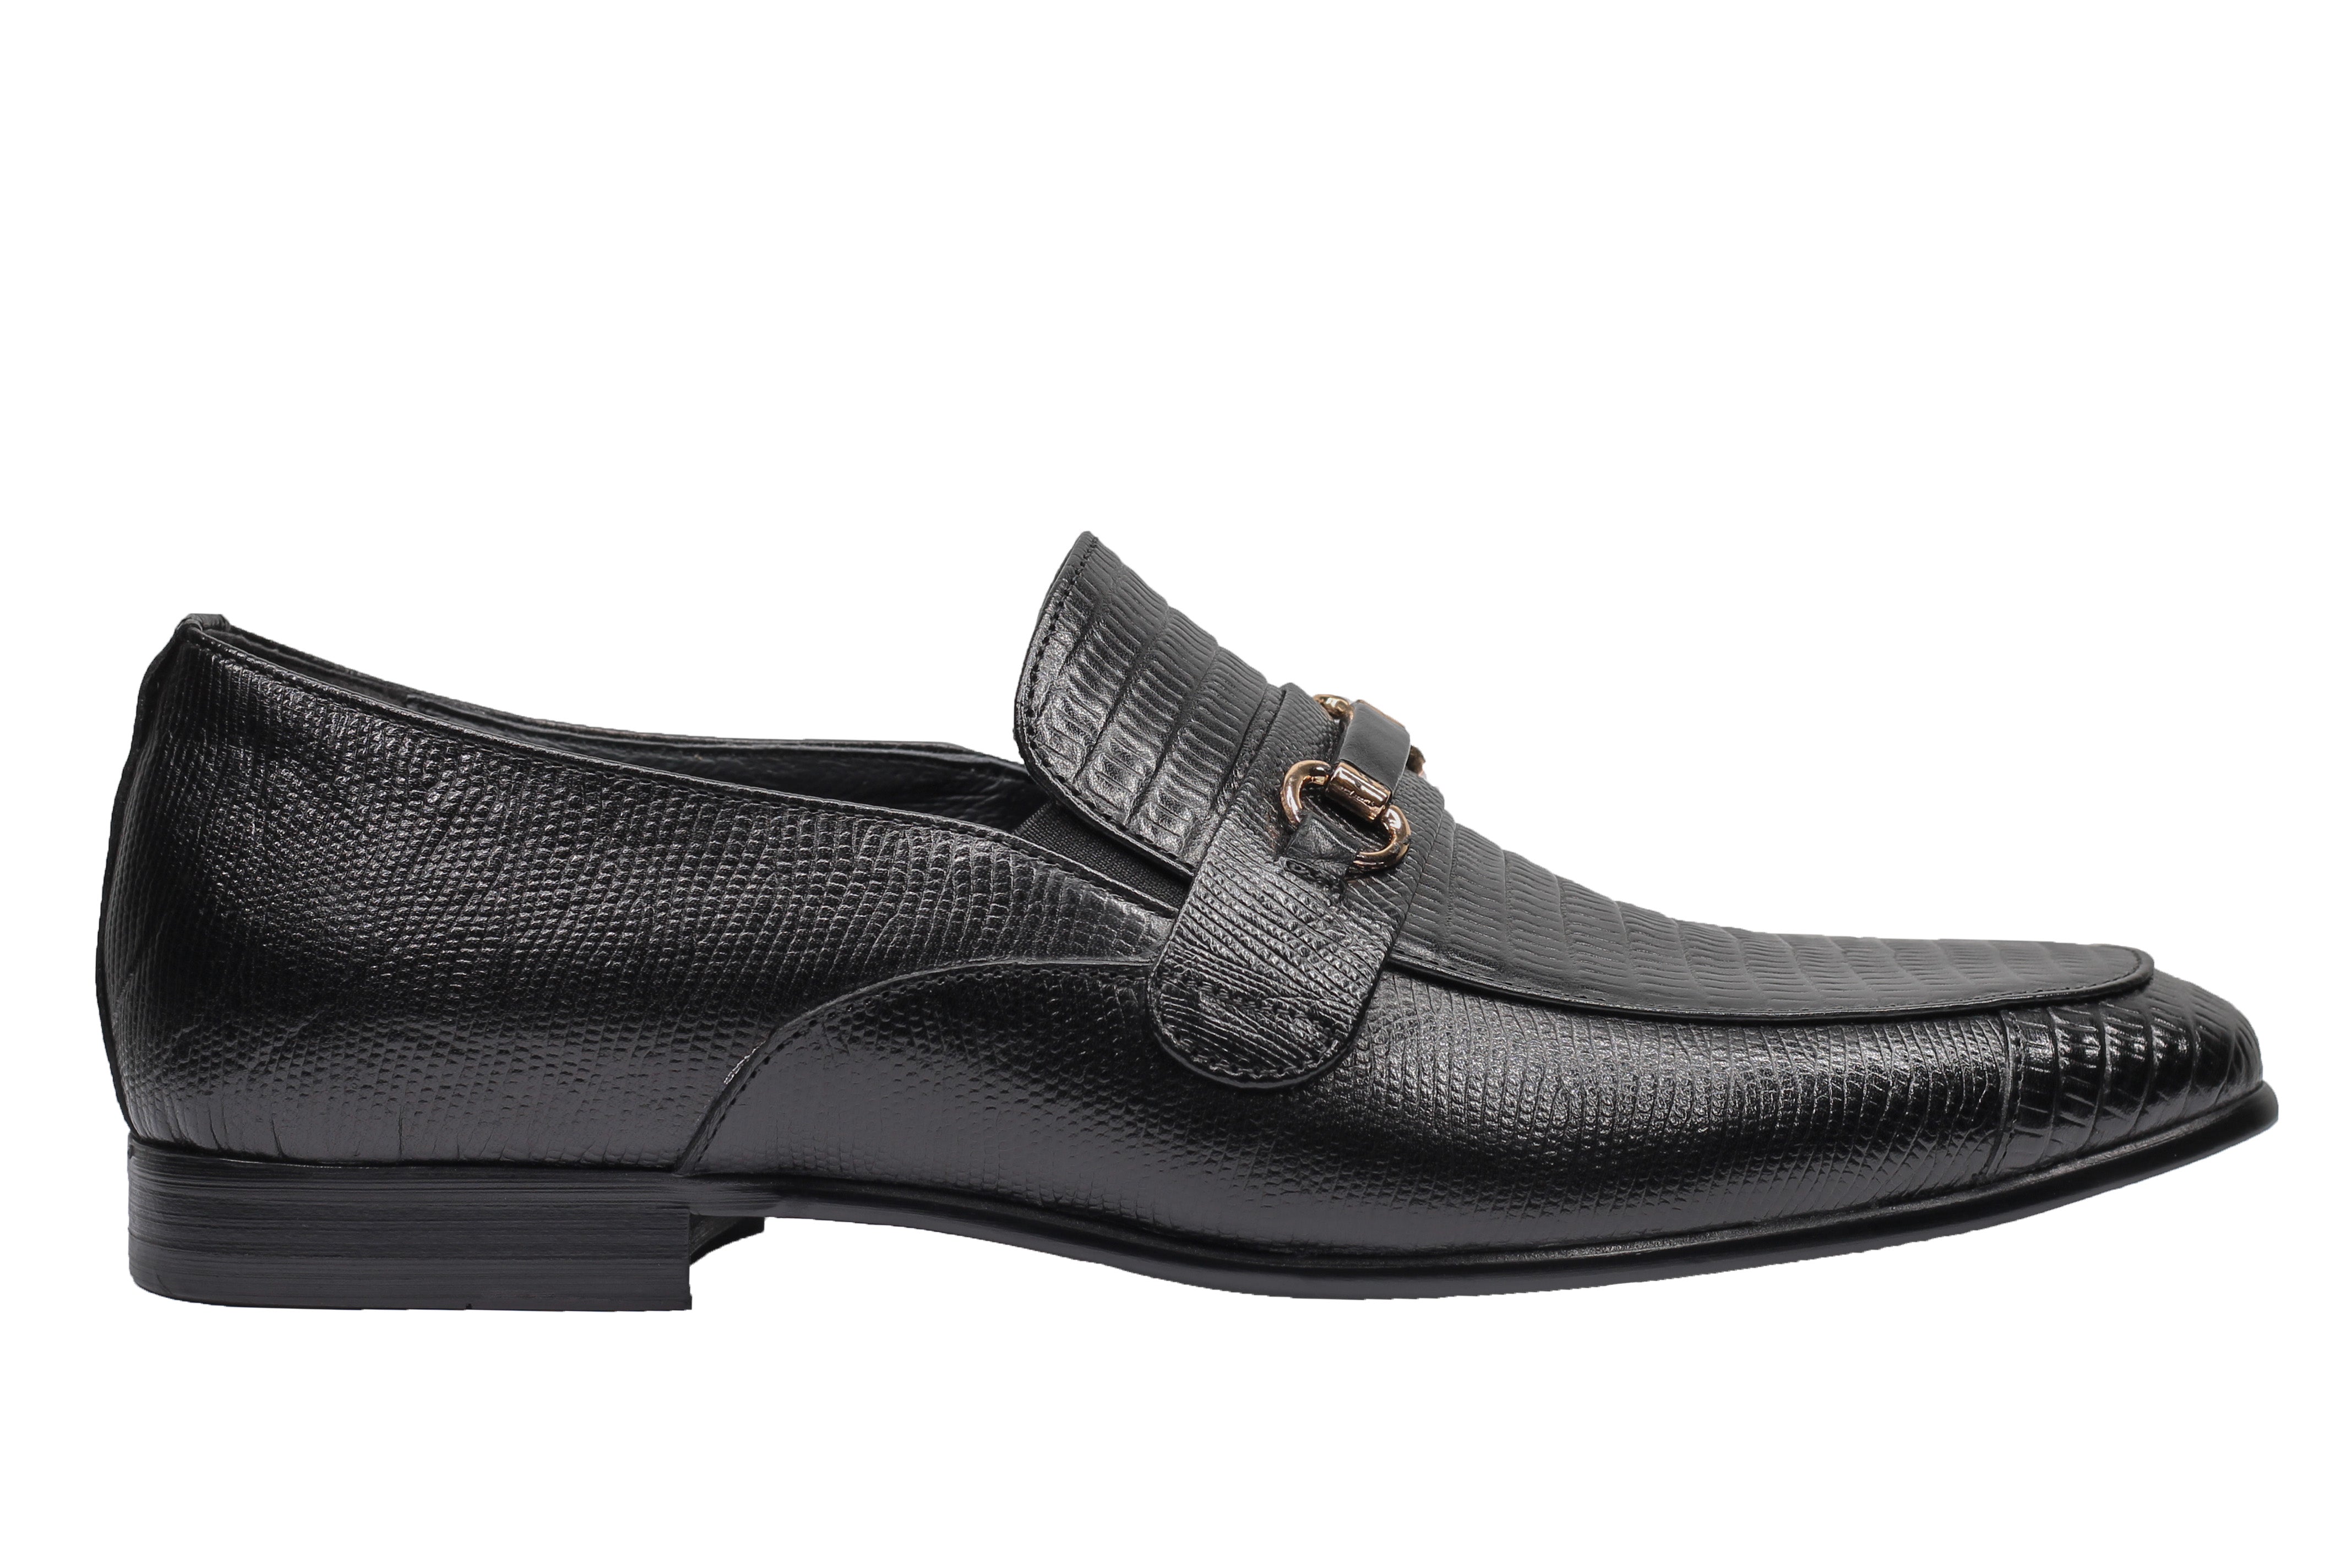 REAL LEATHER BLACK PRINTED SHOES WITH BUCKLE